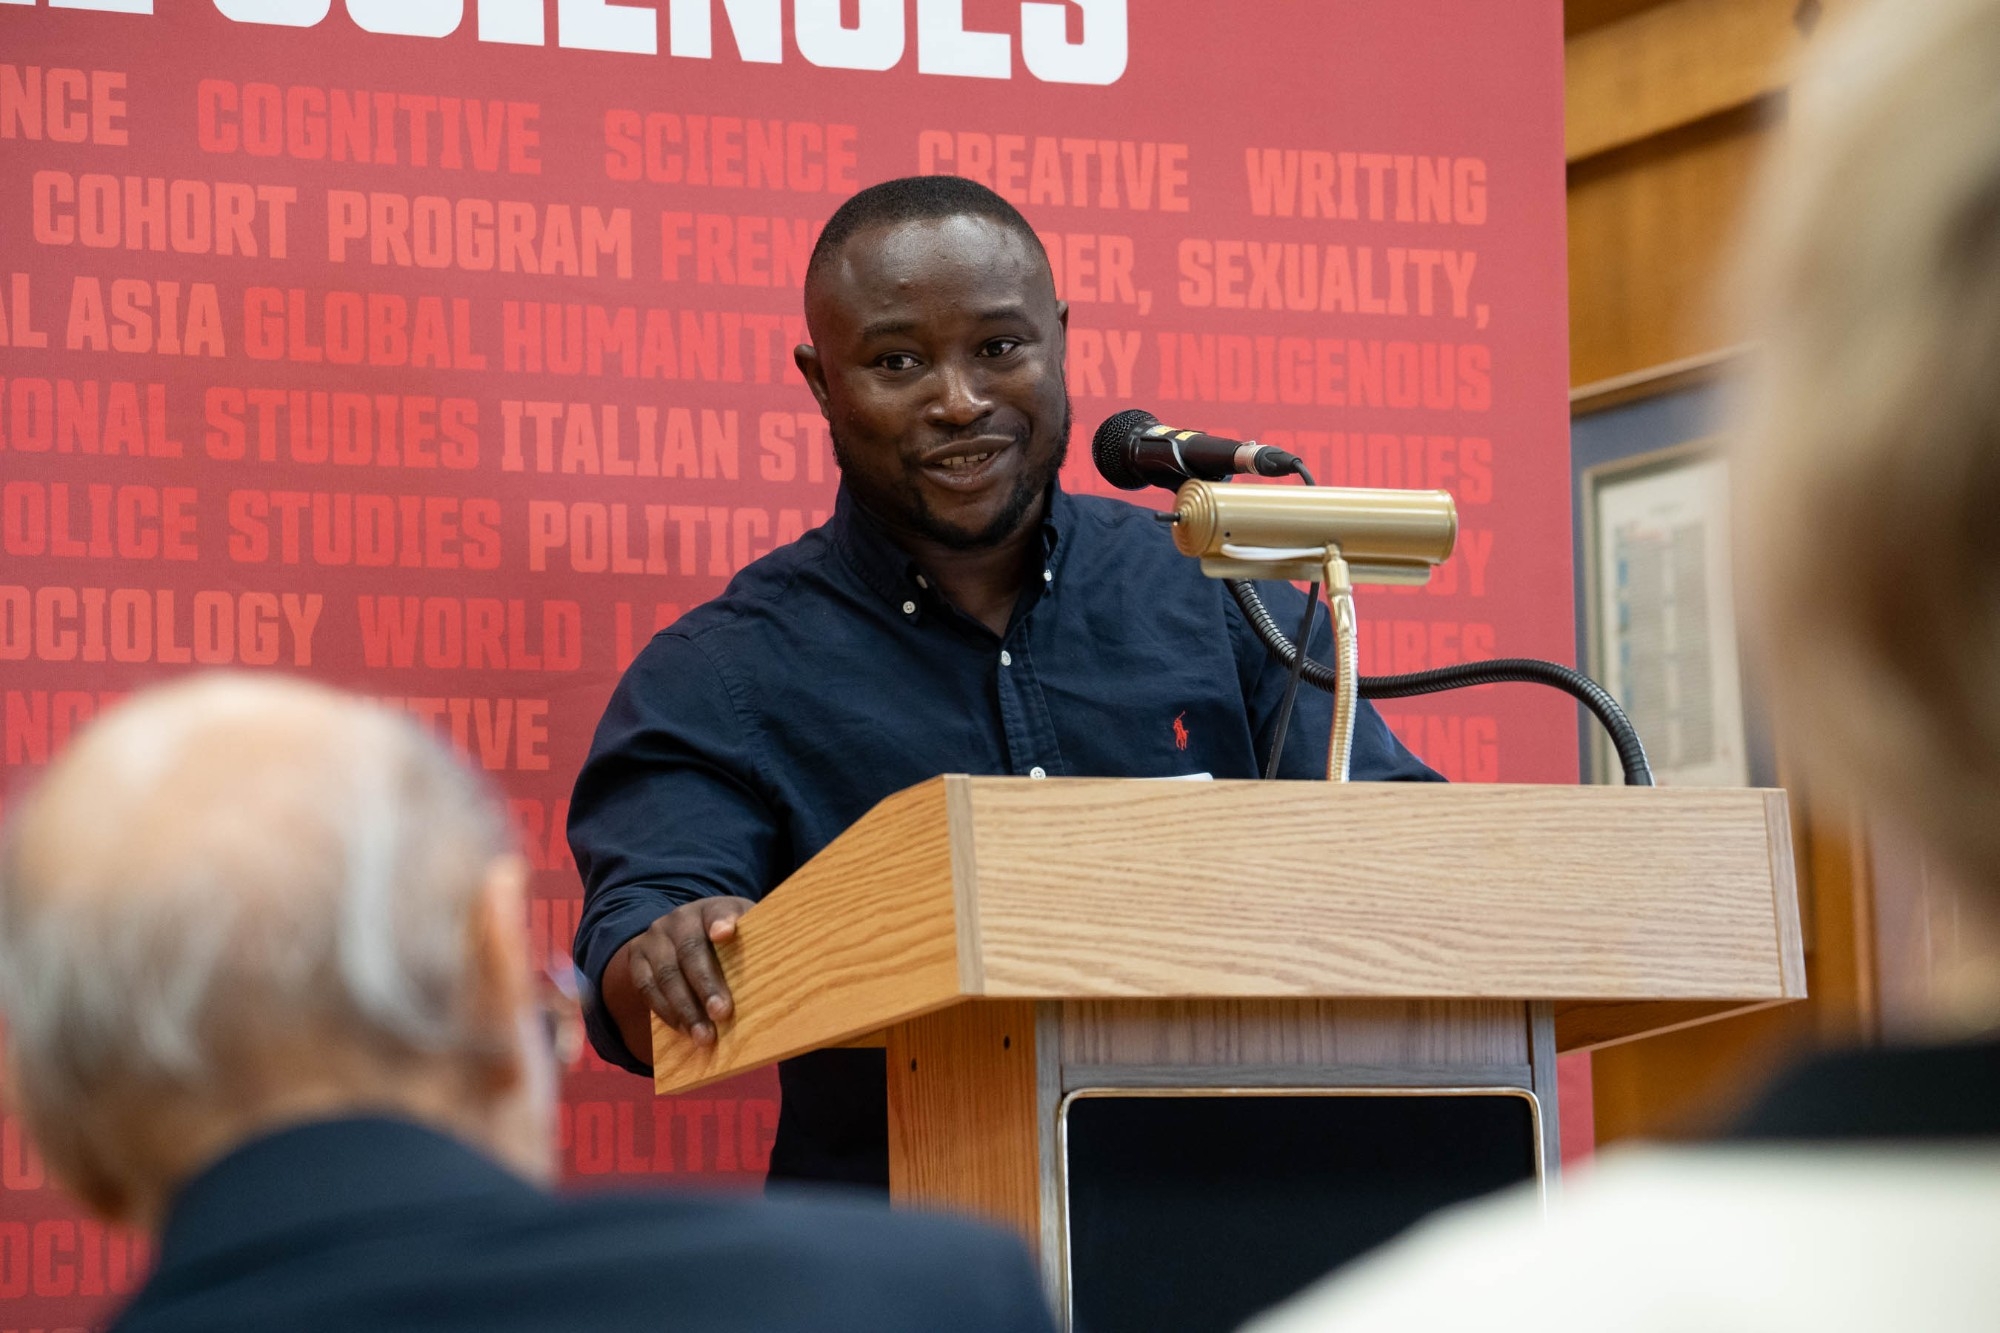 Denis giving a speech at the professorship launch event. He is looking directly at Dr. A.H. Somjee. Denis is wearing a dark blue button down.